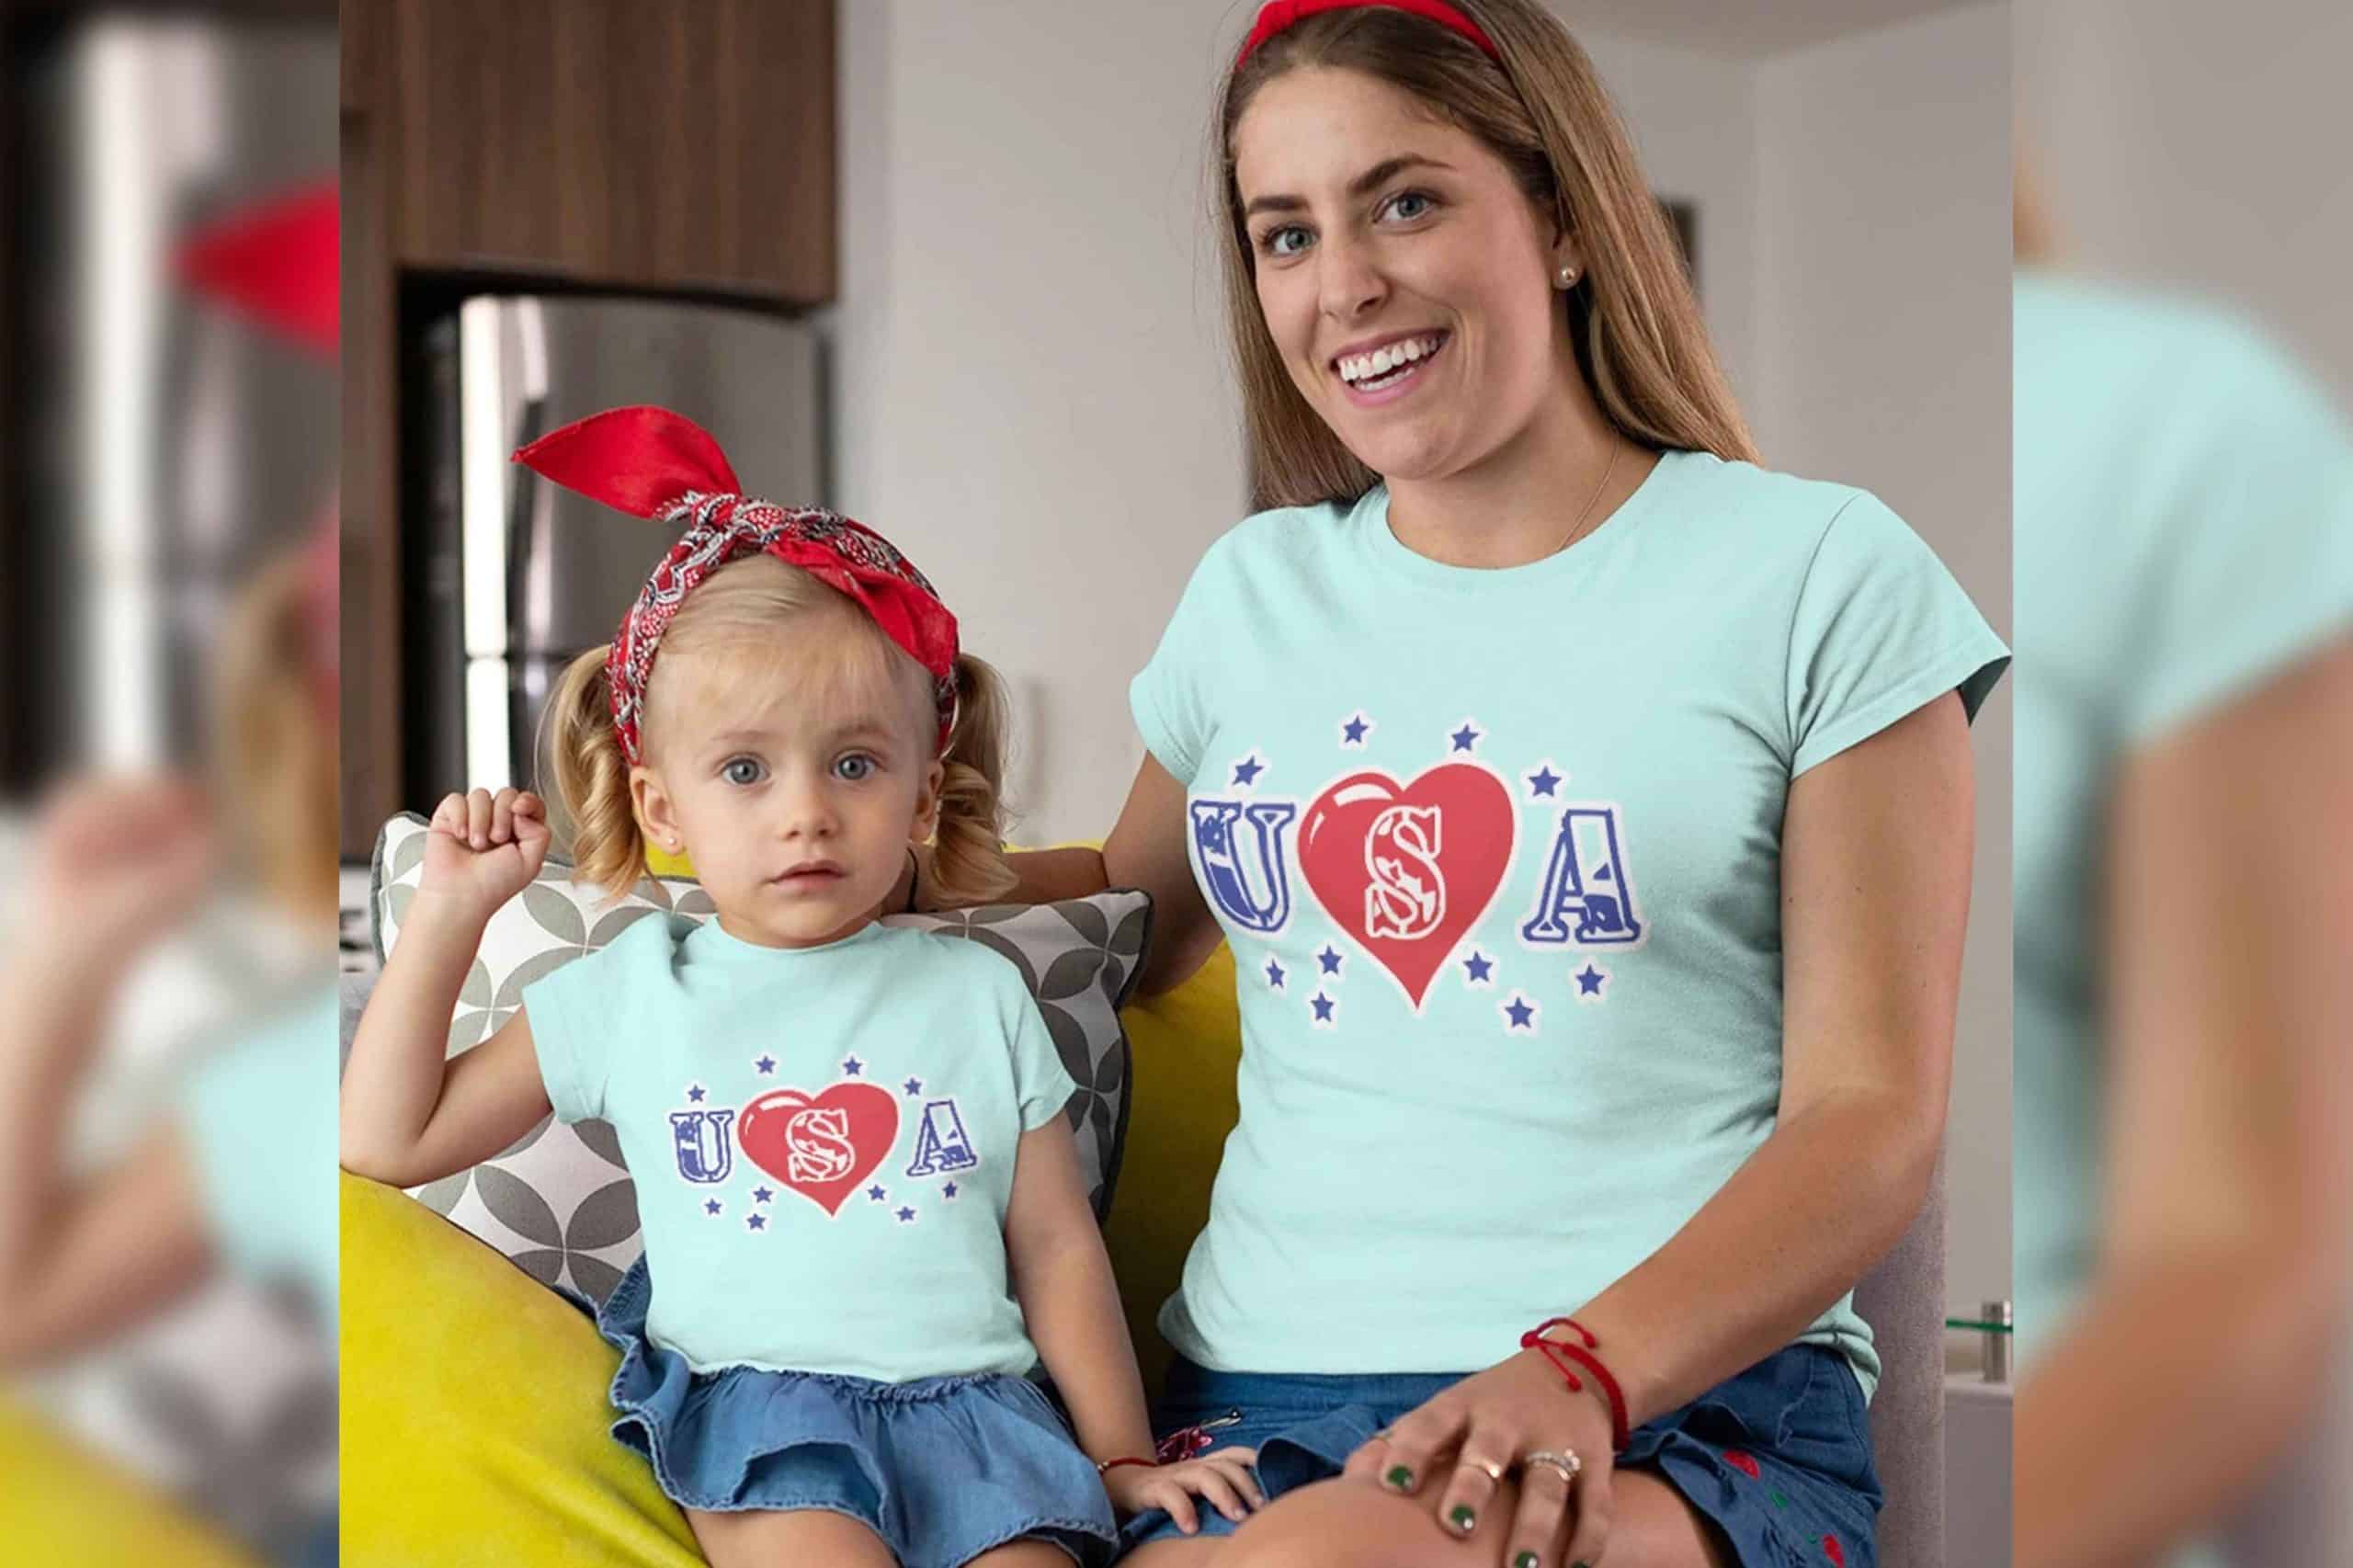 Are You Celebrating Mother's Day Special by Wearing Mother & baby Matching Outfit